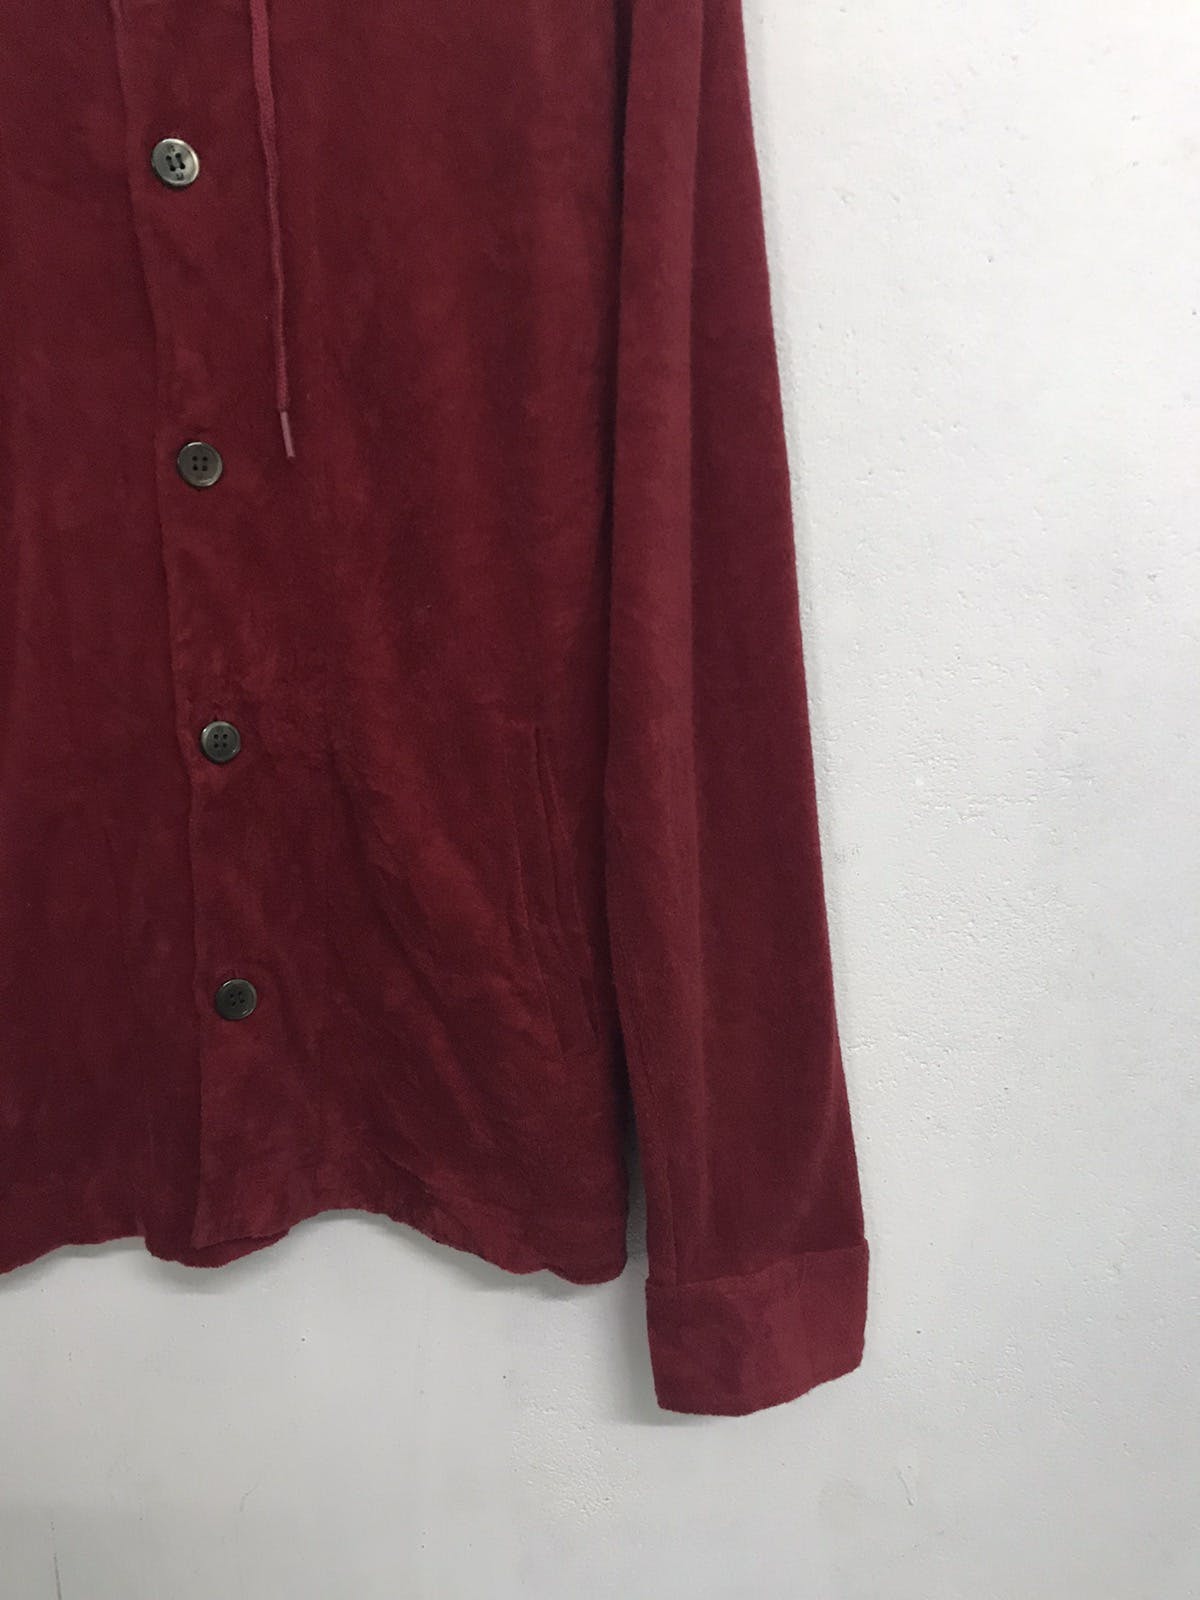 Paul Smith Button Up Hoodie Jacket Made in Japan - 6